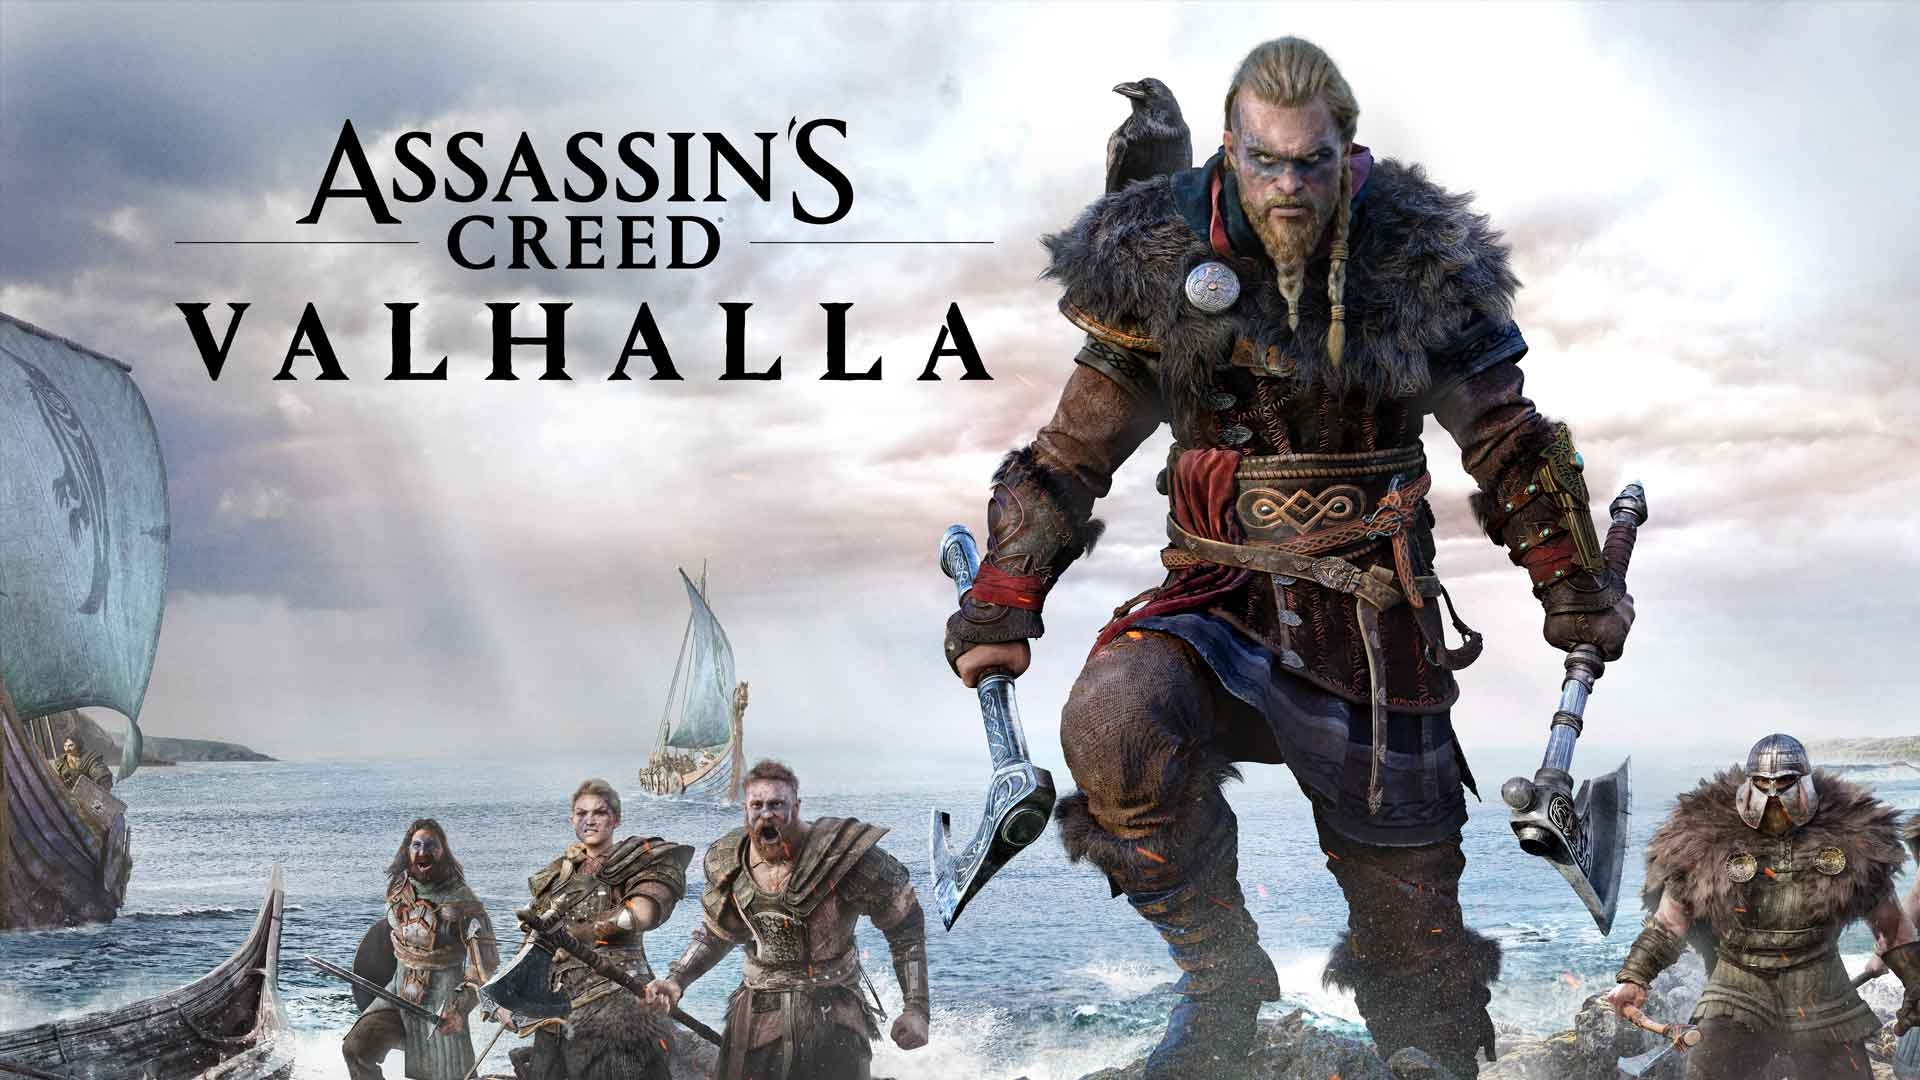 Assassin's Creed Valhalla review: A solid Viking tale but nothing more